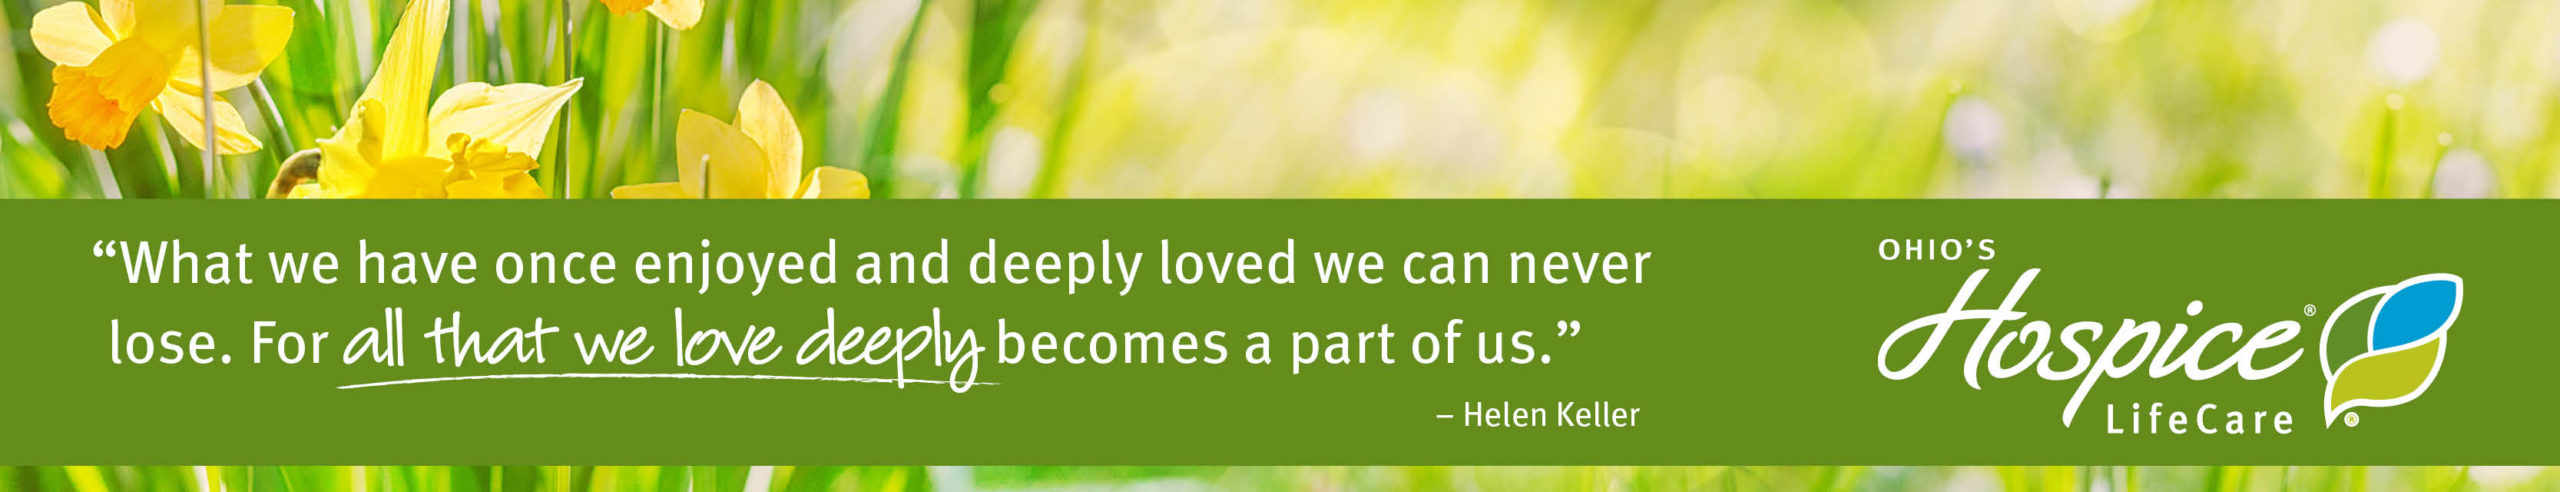 "What we have once enjoyed and deeply loved we can never lose. For all that we love deeply becomes a part of us." - Helen Keller Ohio's Hospice LifeCare